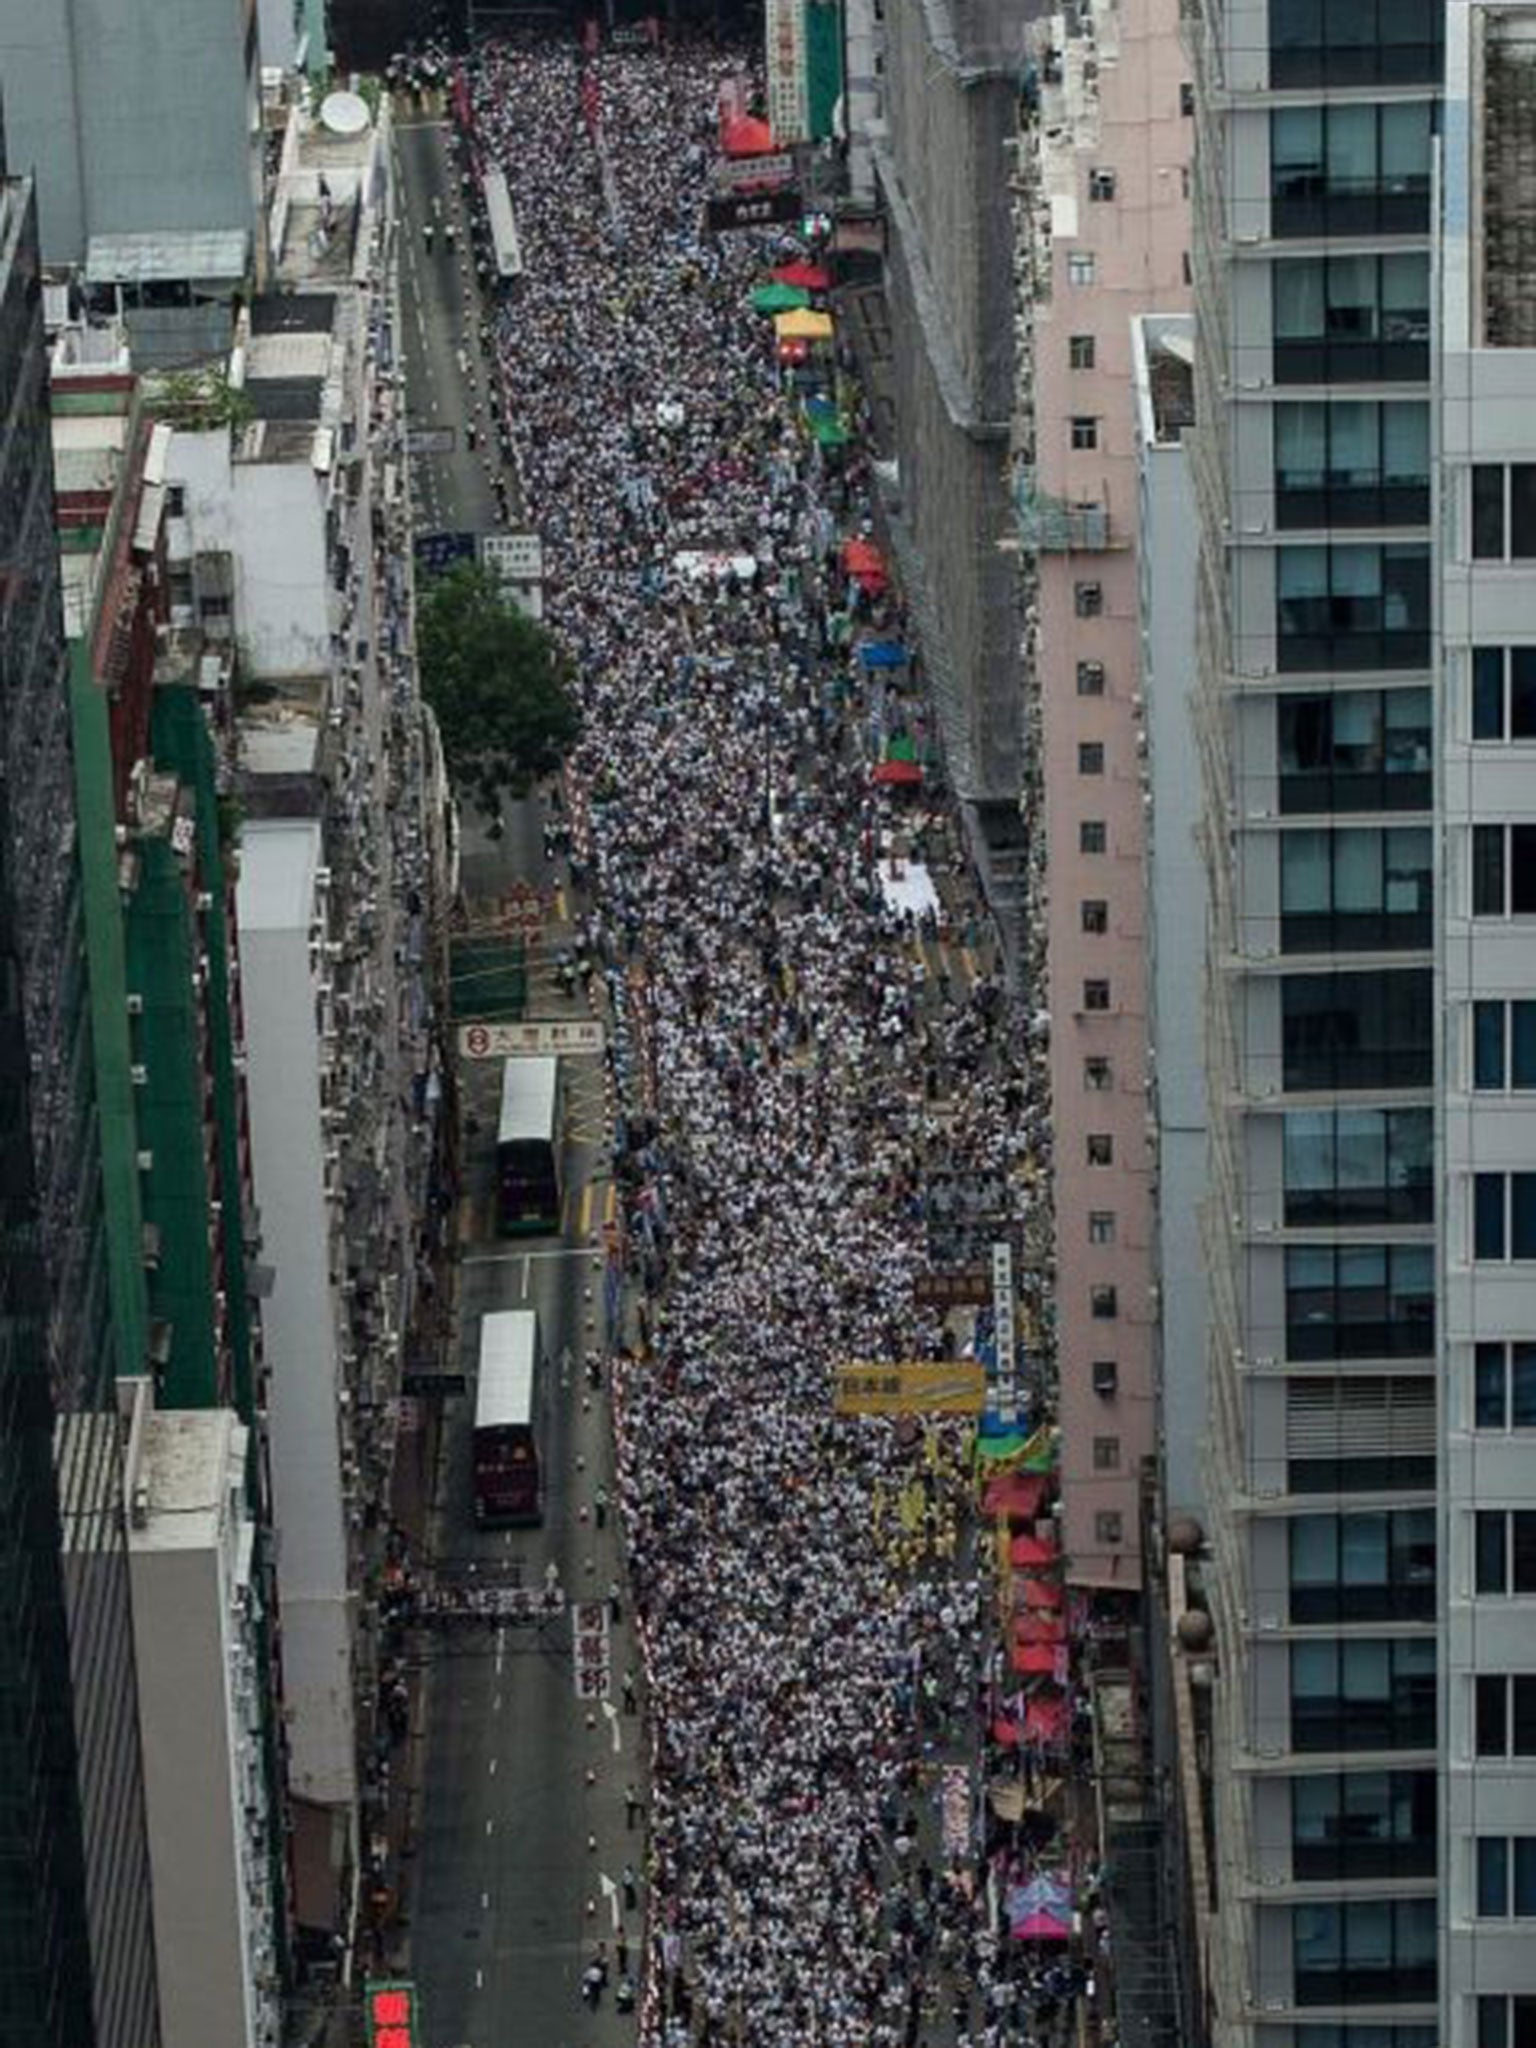 Tens of thousands of Hong Kong residents took to the streets for the annual 1 July demonstration to mark the surrender of the territory to Chinese control in 1997, in what organisers said they hoped would be the biggest challenge to Communist Party rule i